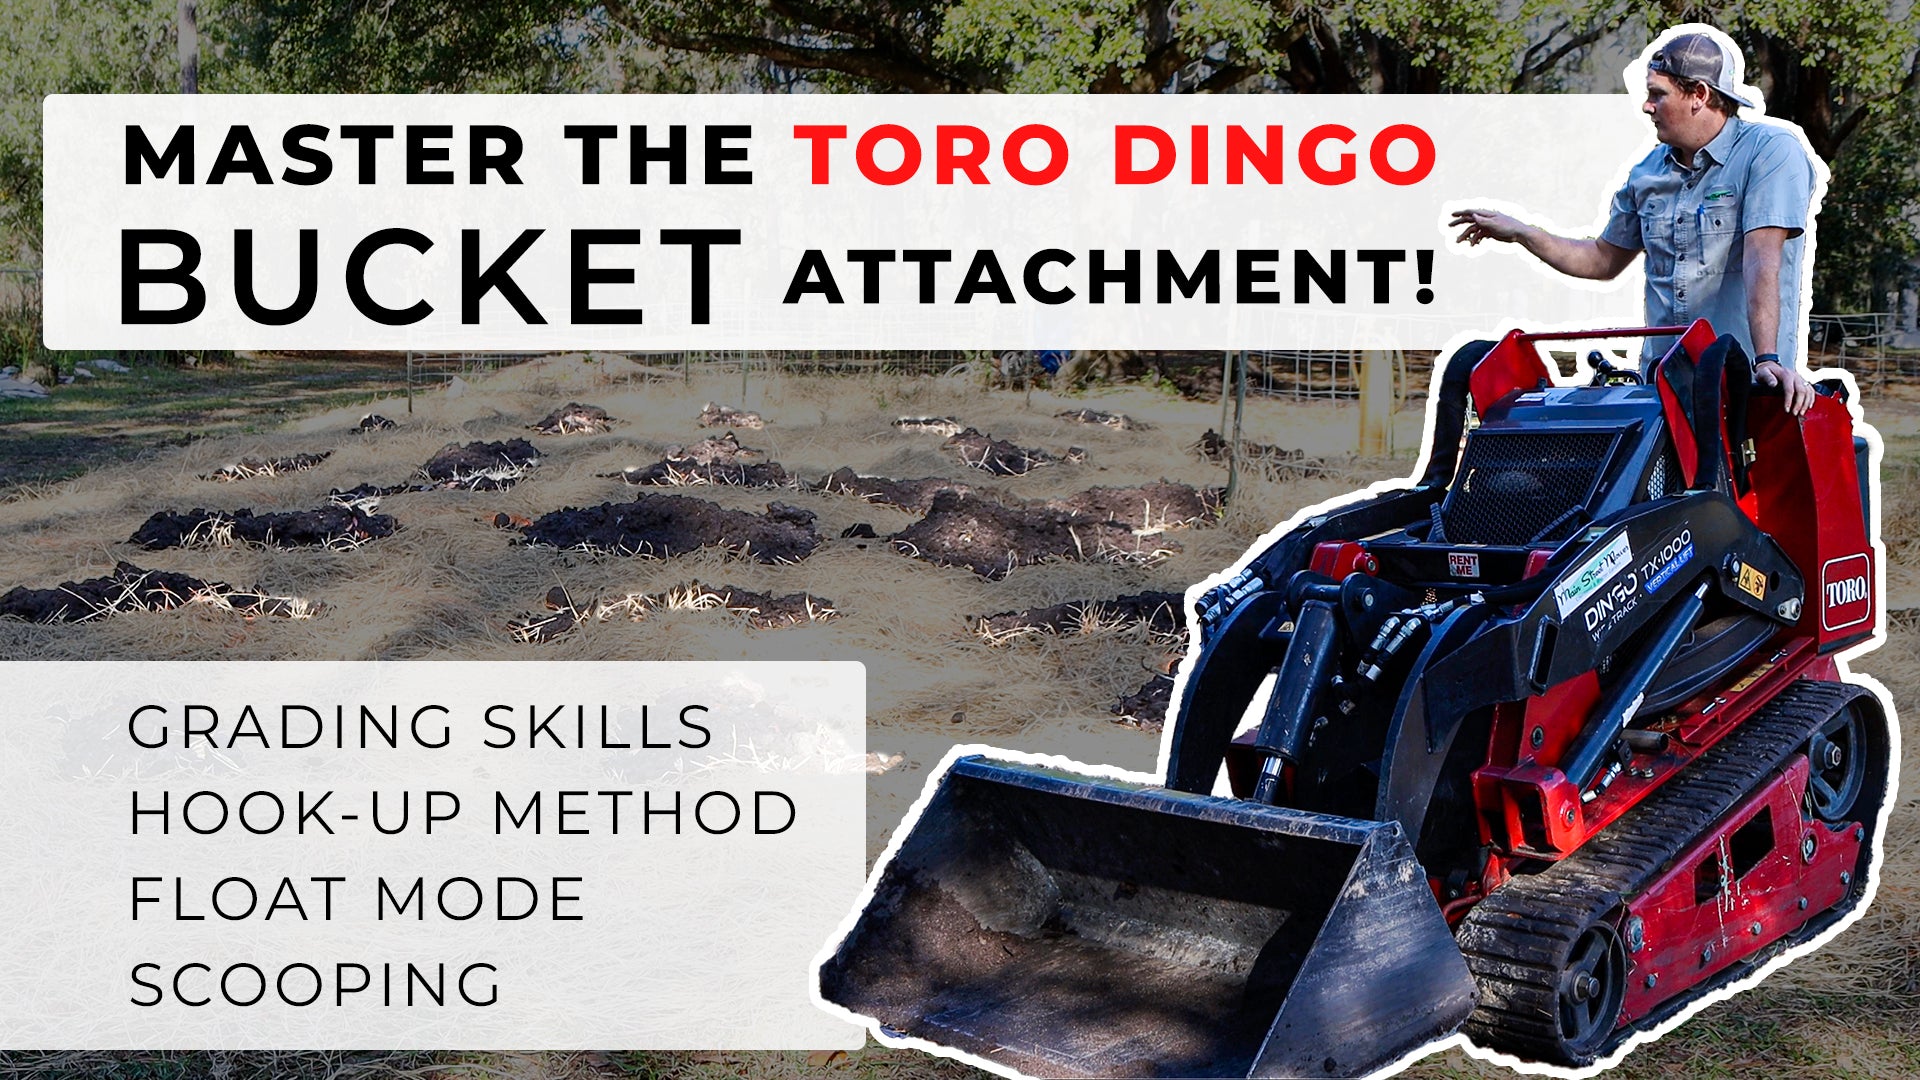 CUT your gardening time in HALF! | How to use Toro Dingo & BUCKET Attachment